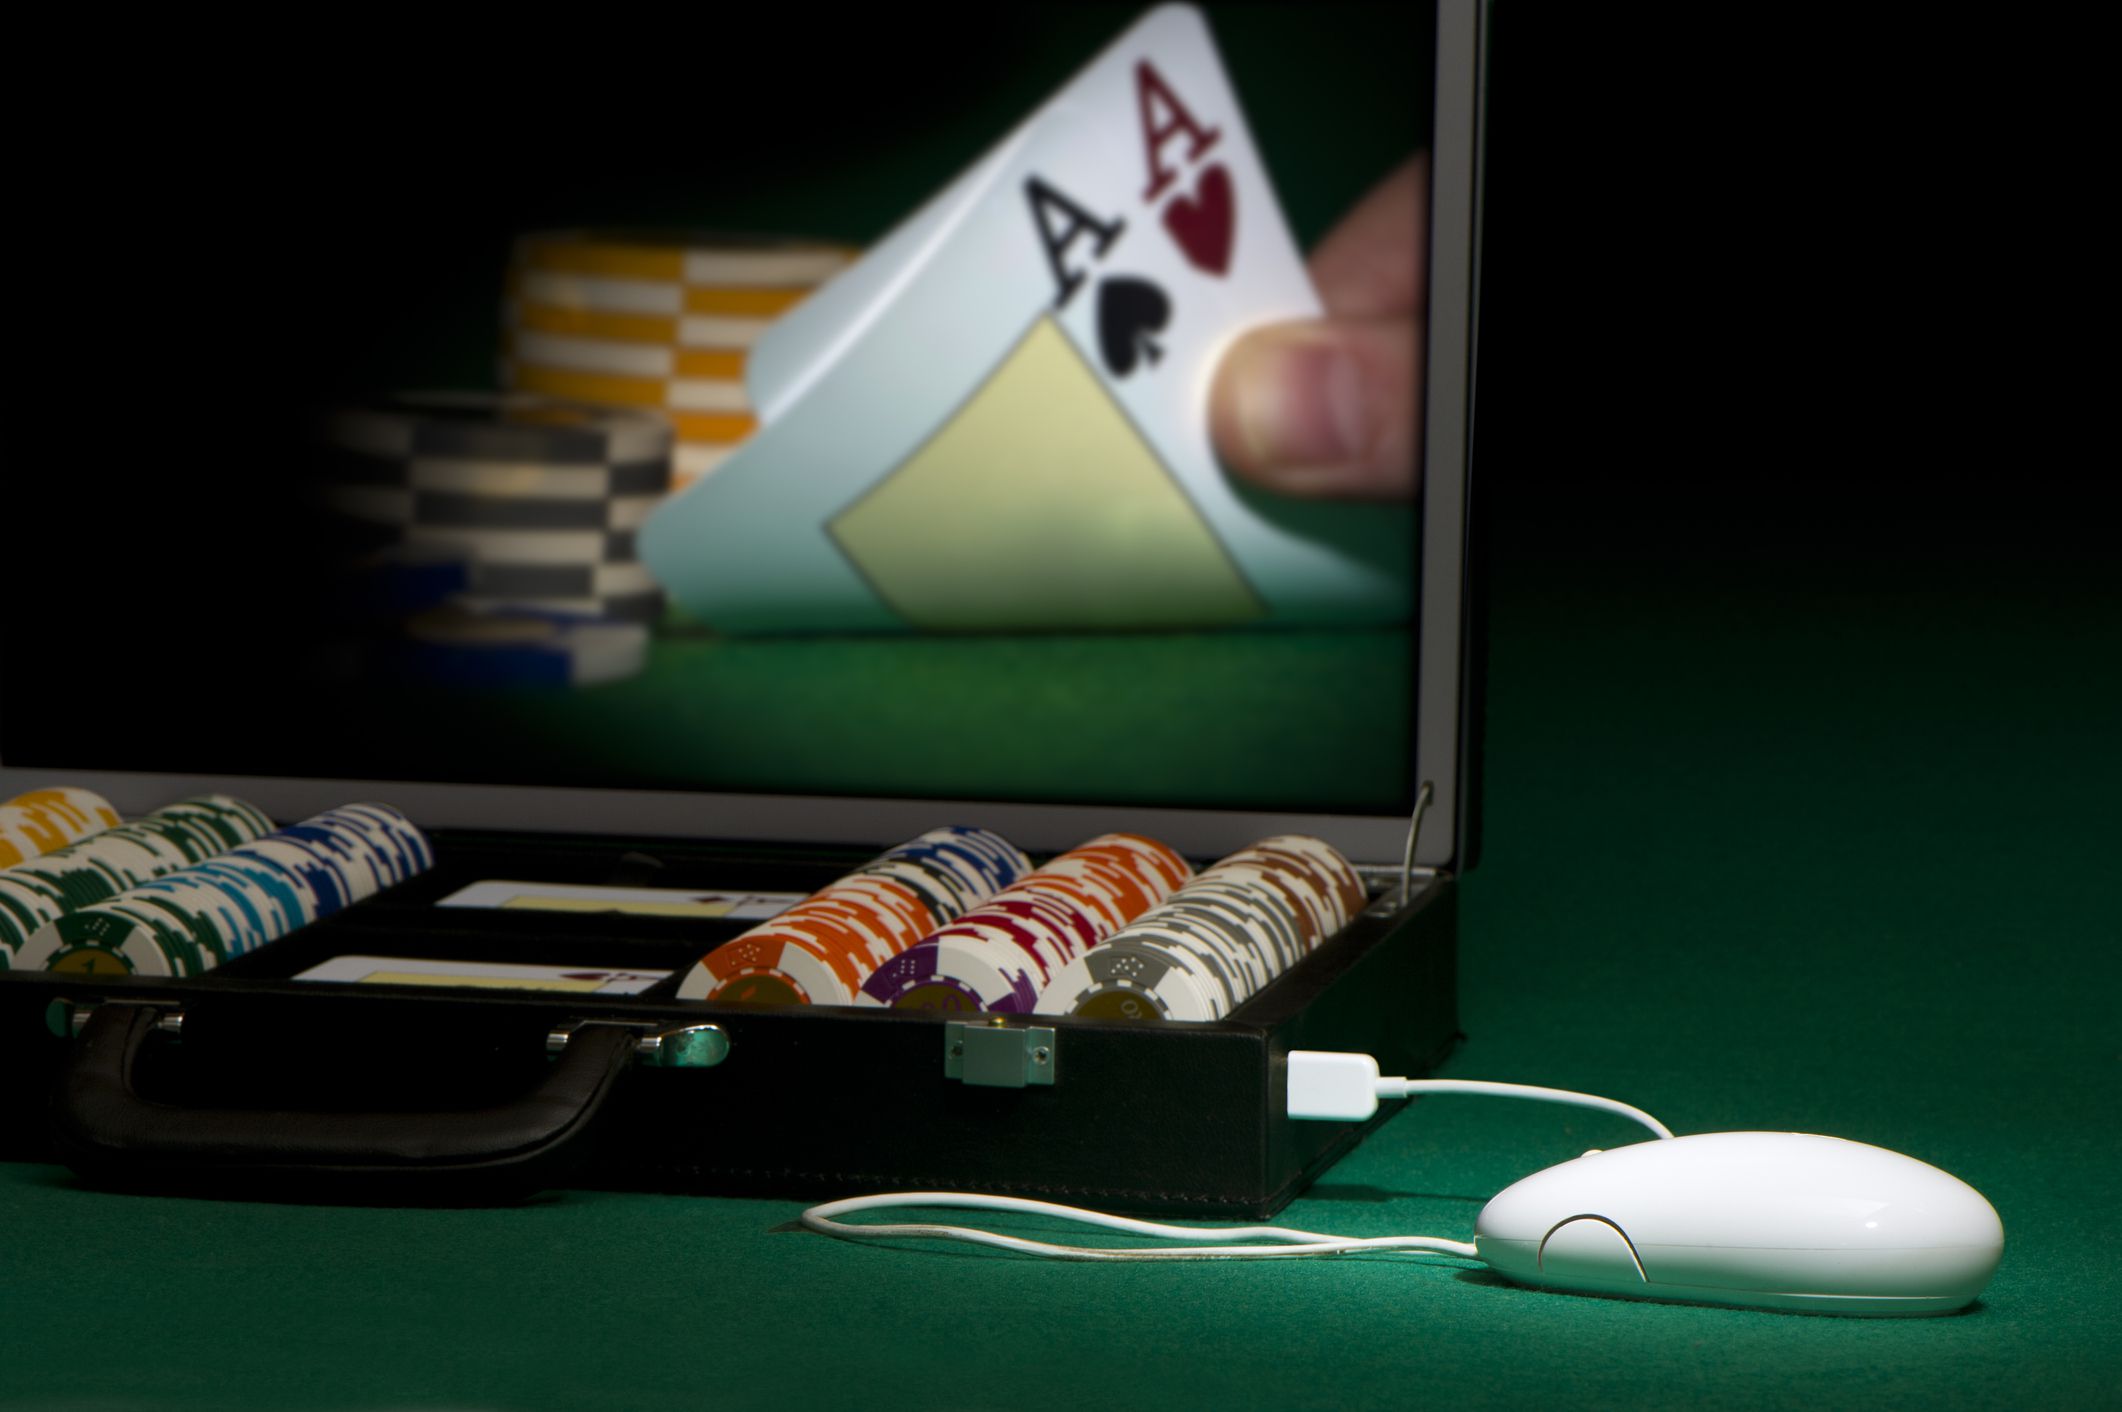 Online-Casino-by-Creativaimage-GettyImages-155378330-5c7407c1cff47e0001b1e368.jpg